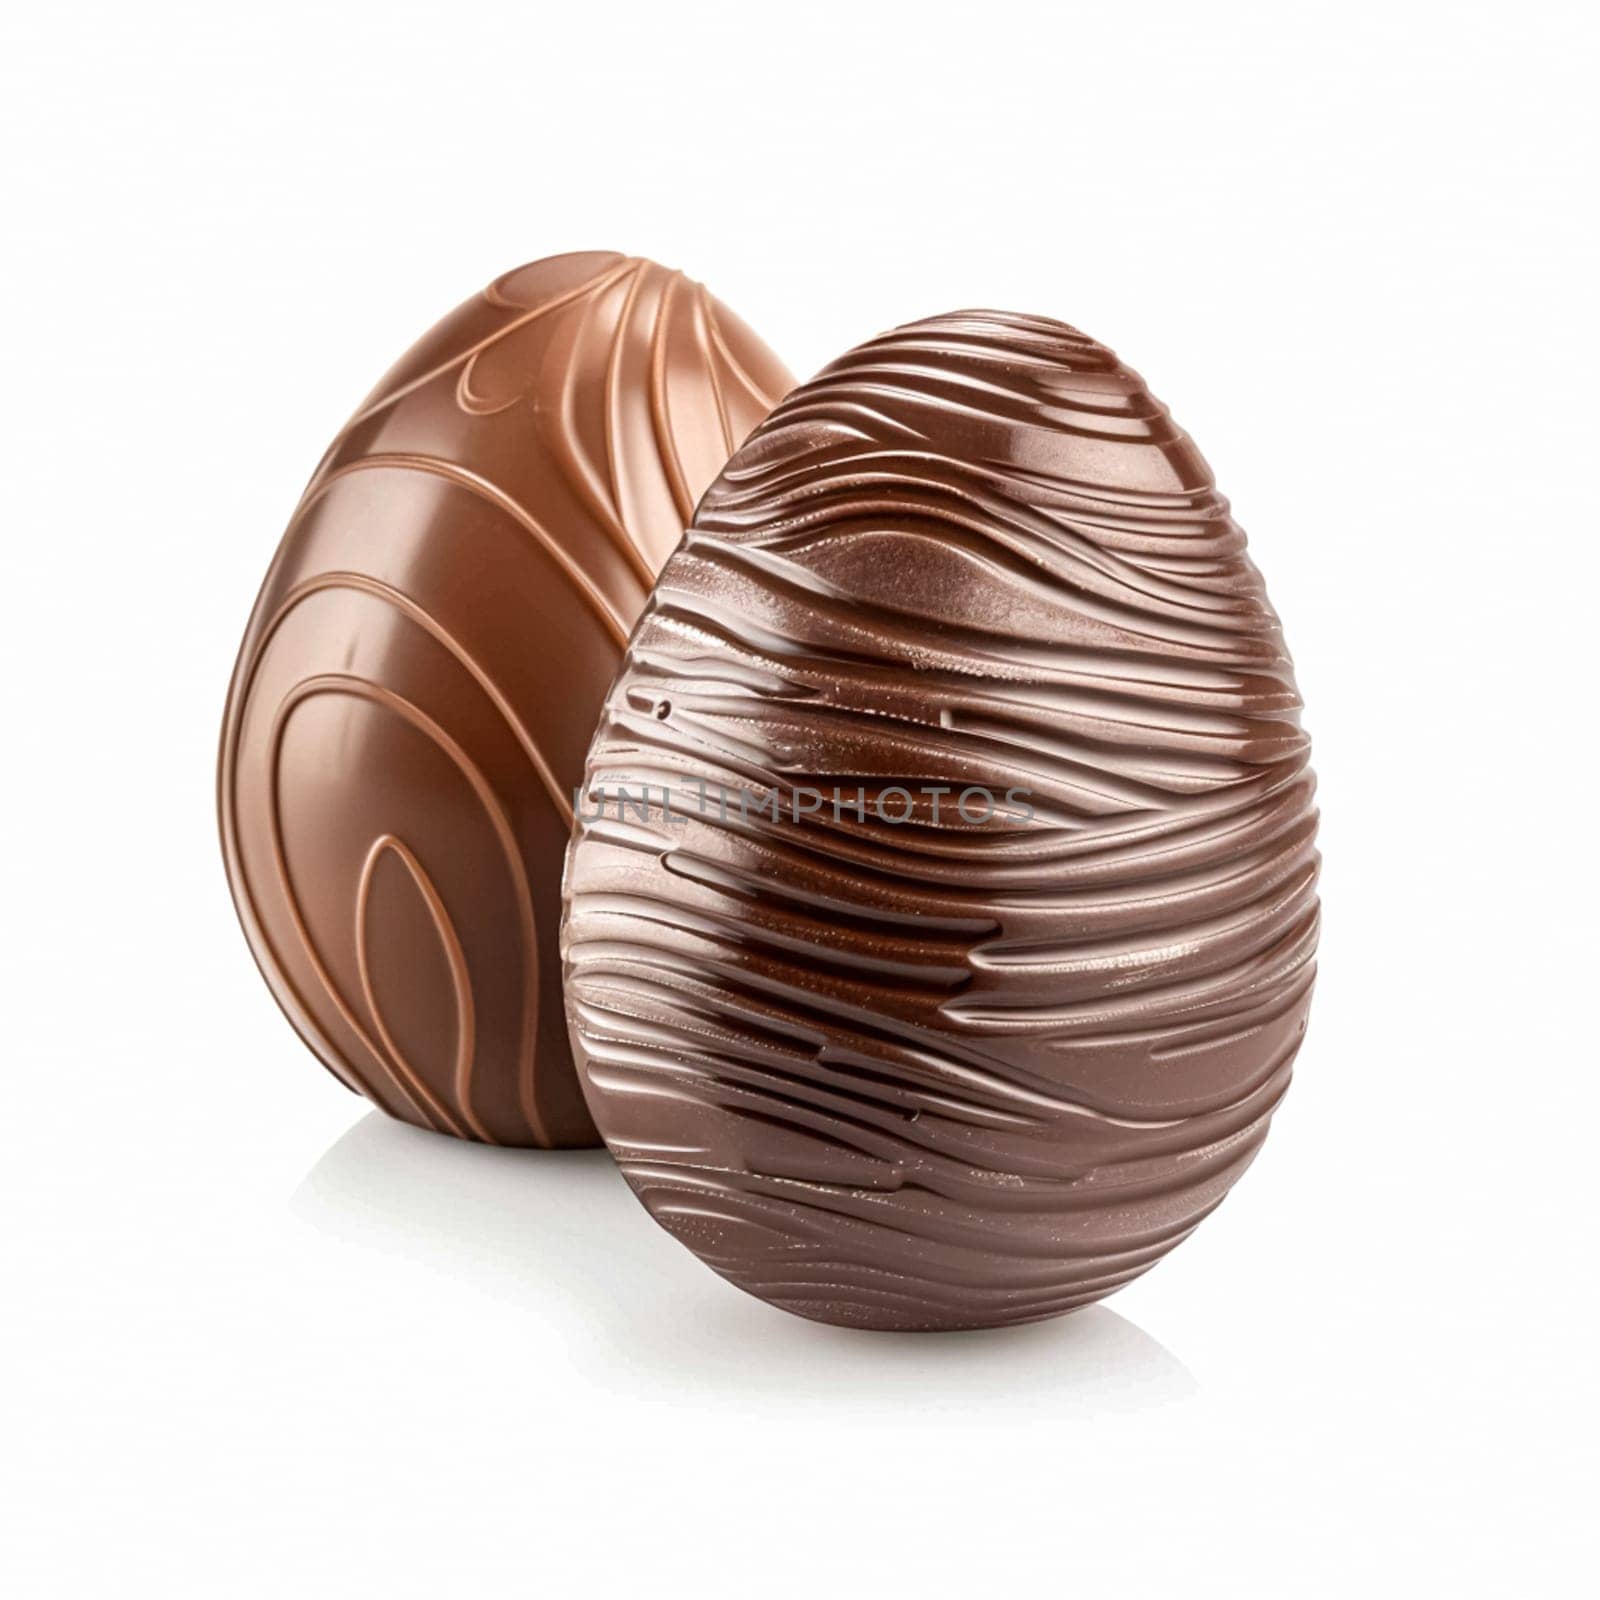 Chocolate Easter egg isolated on white background, sweet holiday present and gift by Anneleven